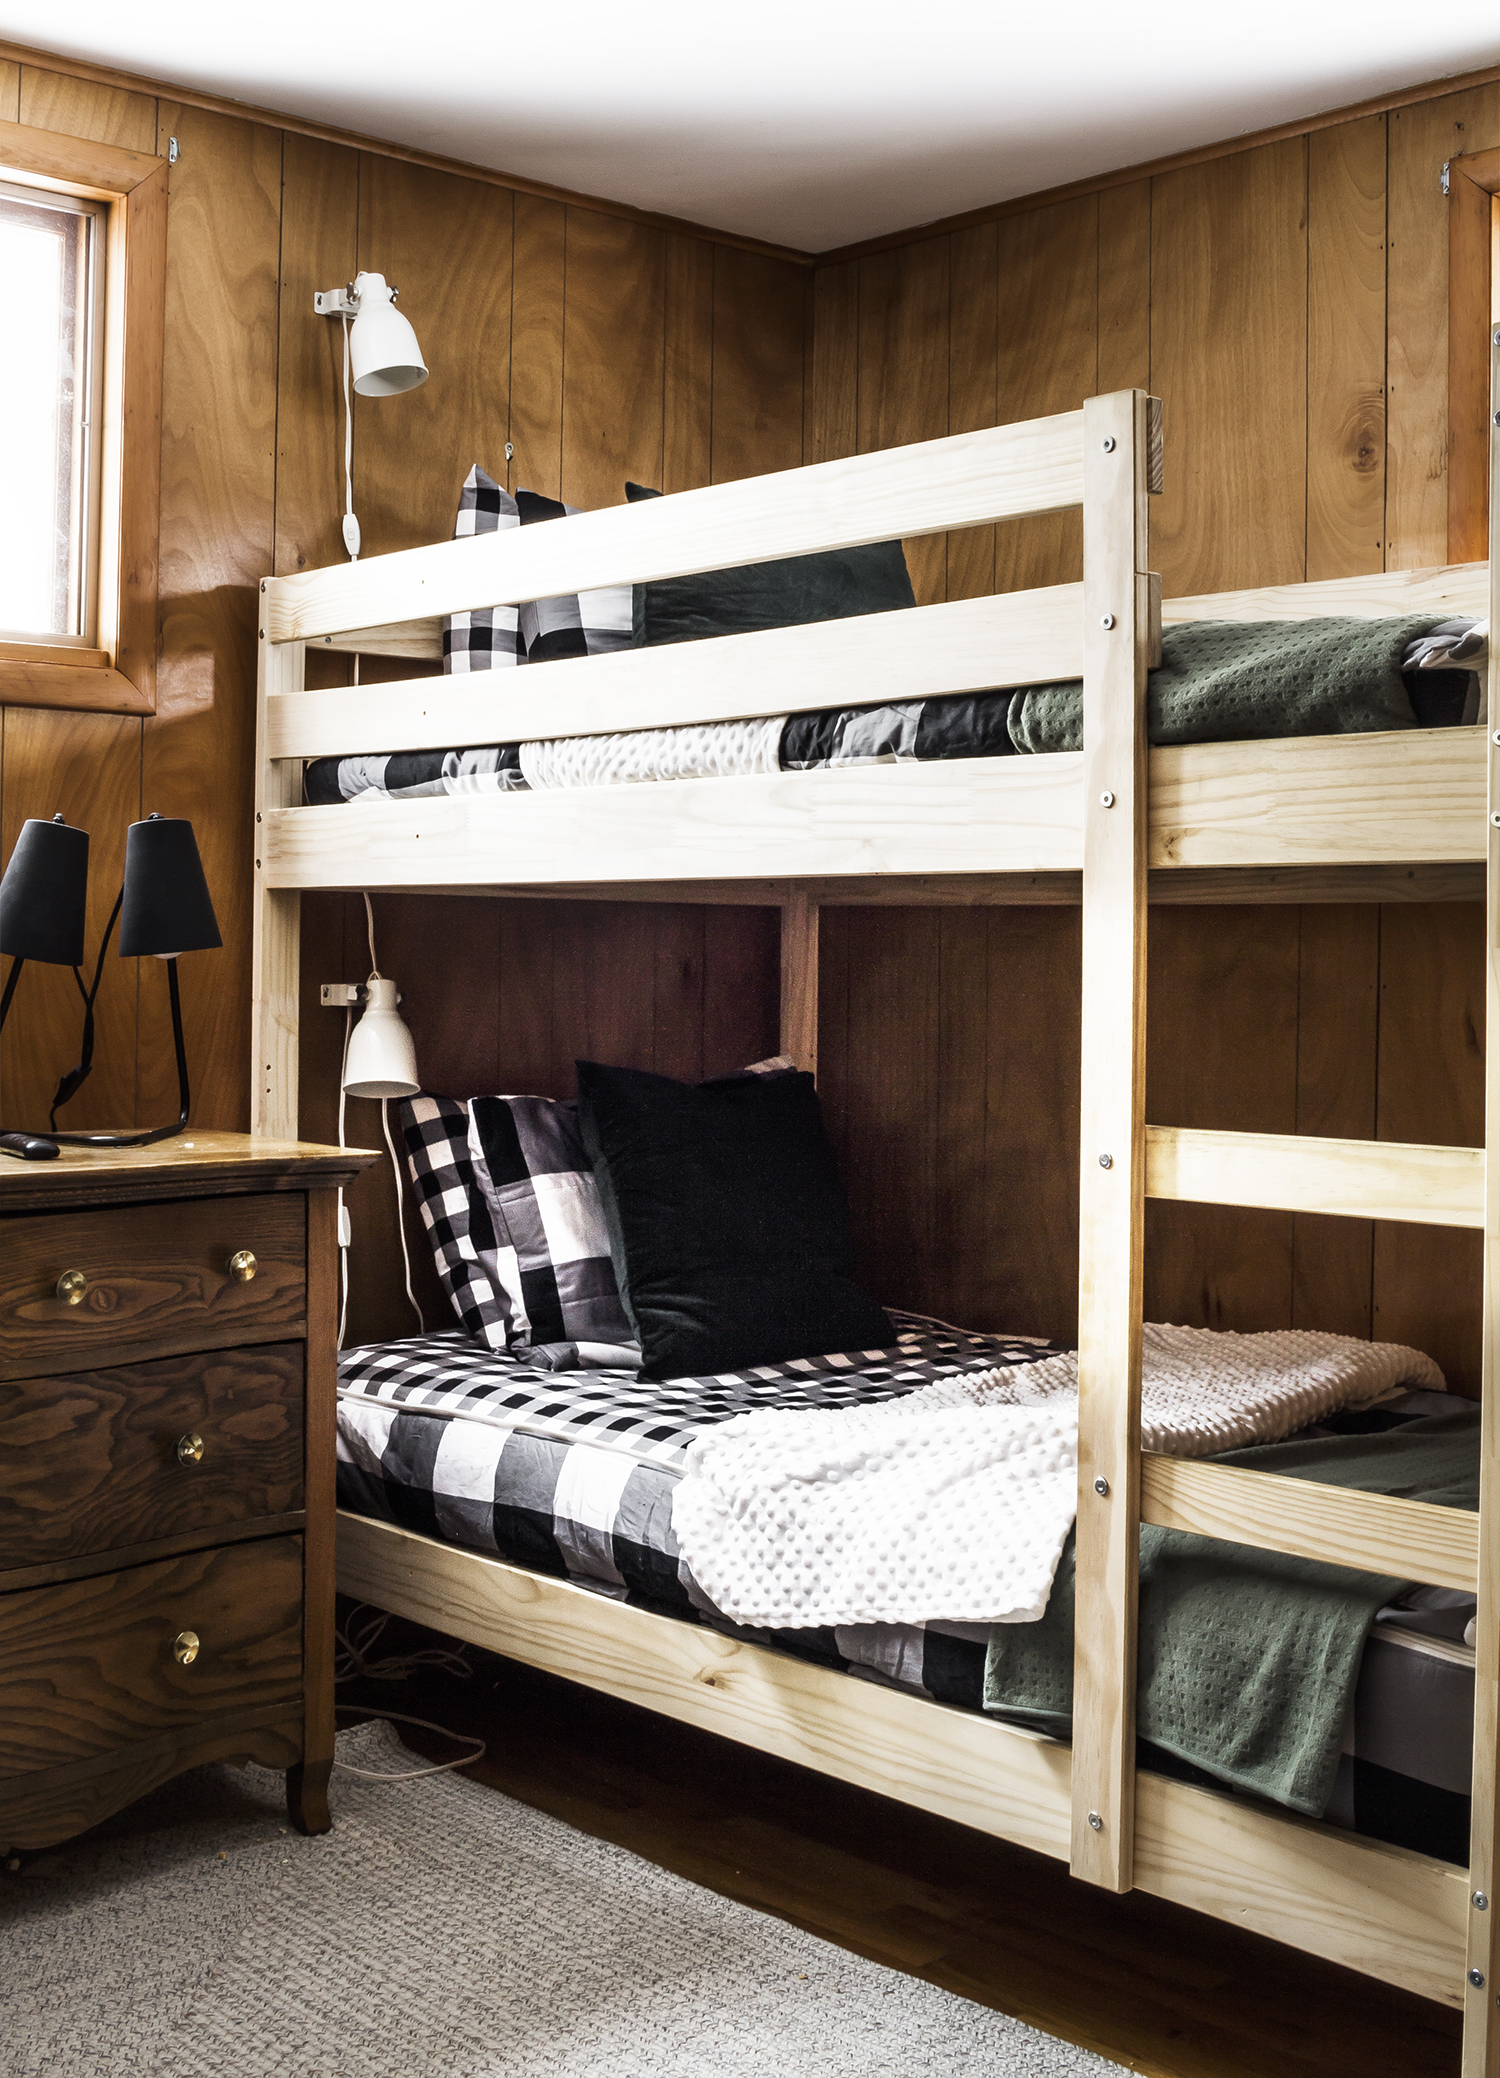 Cabin Bunk Room with Buffalo Check Beddy's